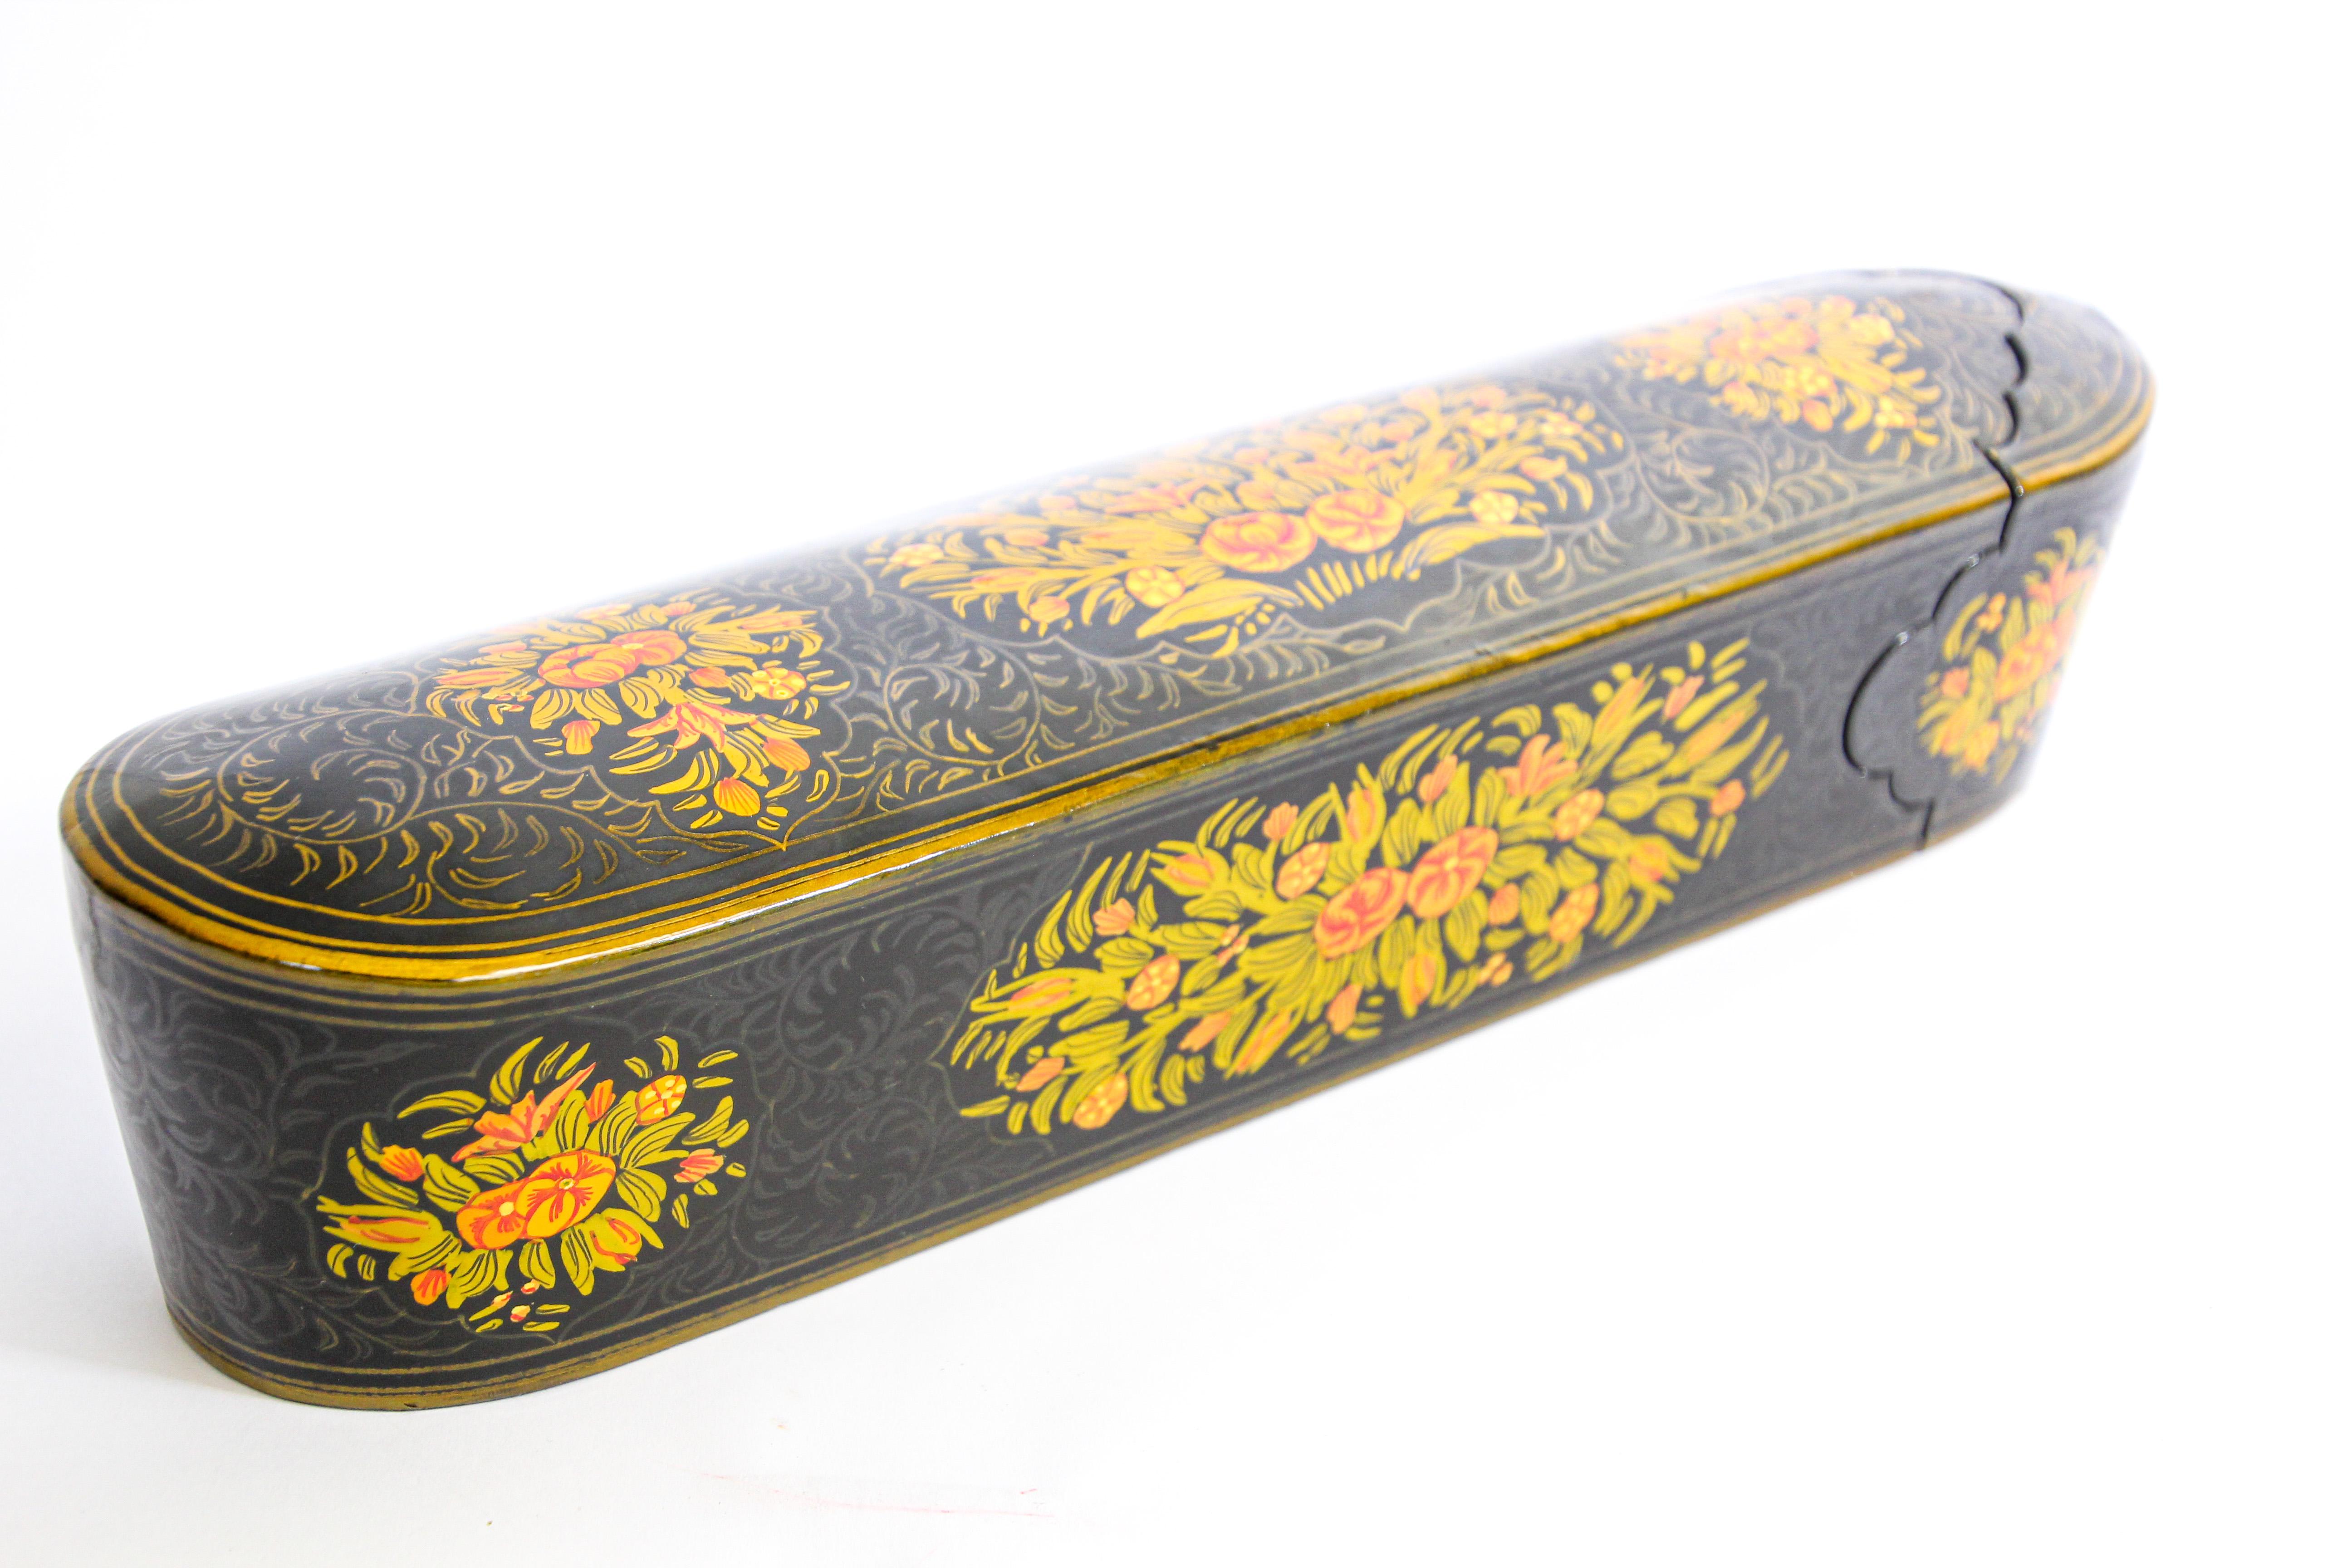 Indian Indo Persian Lacquer Pen Box Hand Painted with Floral Design